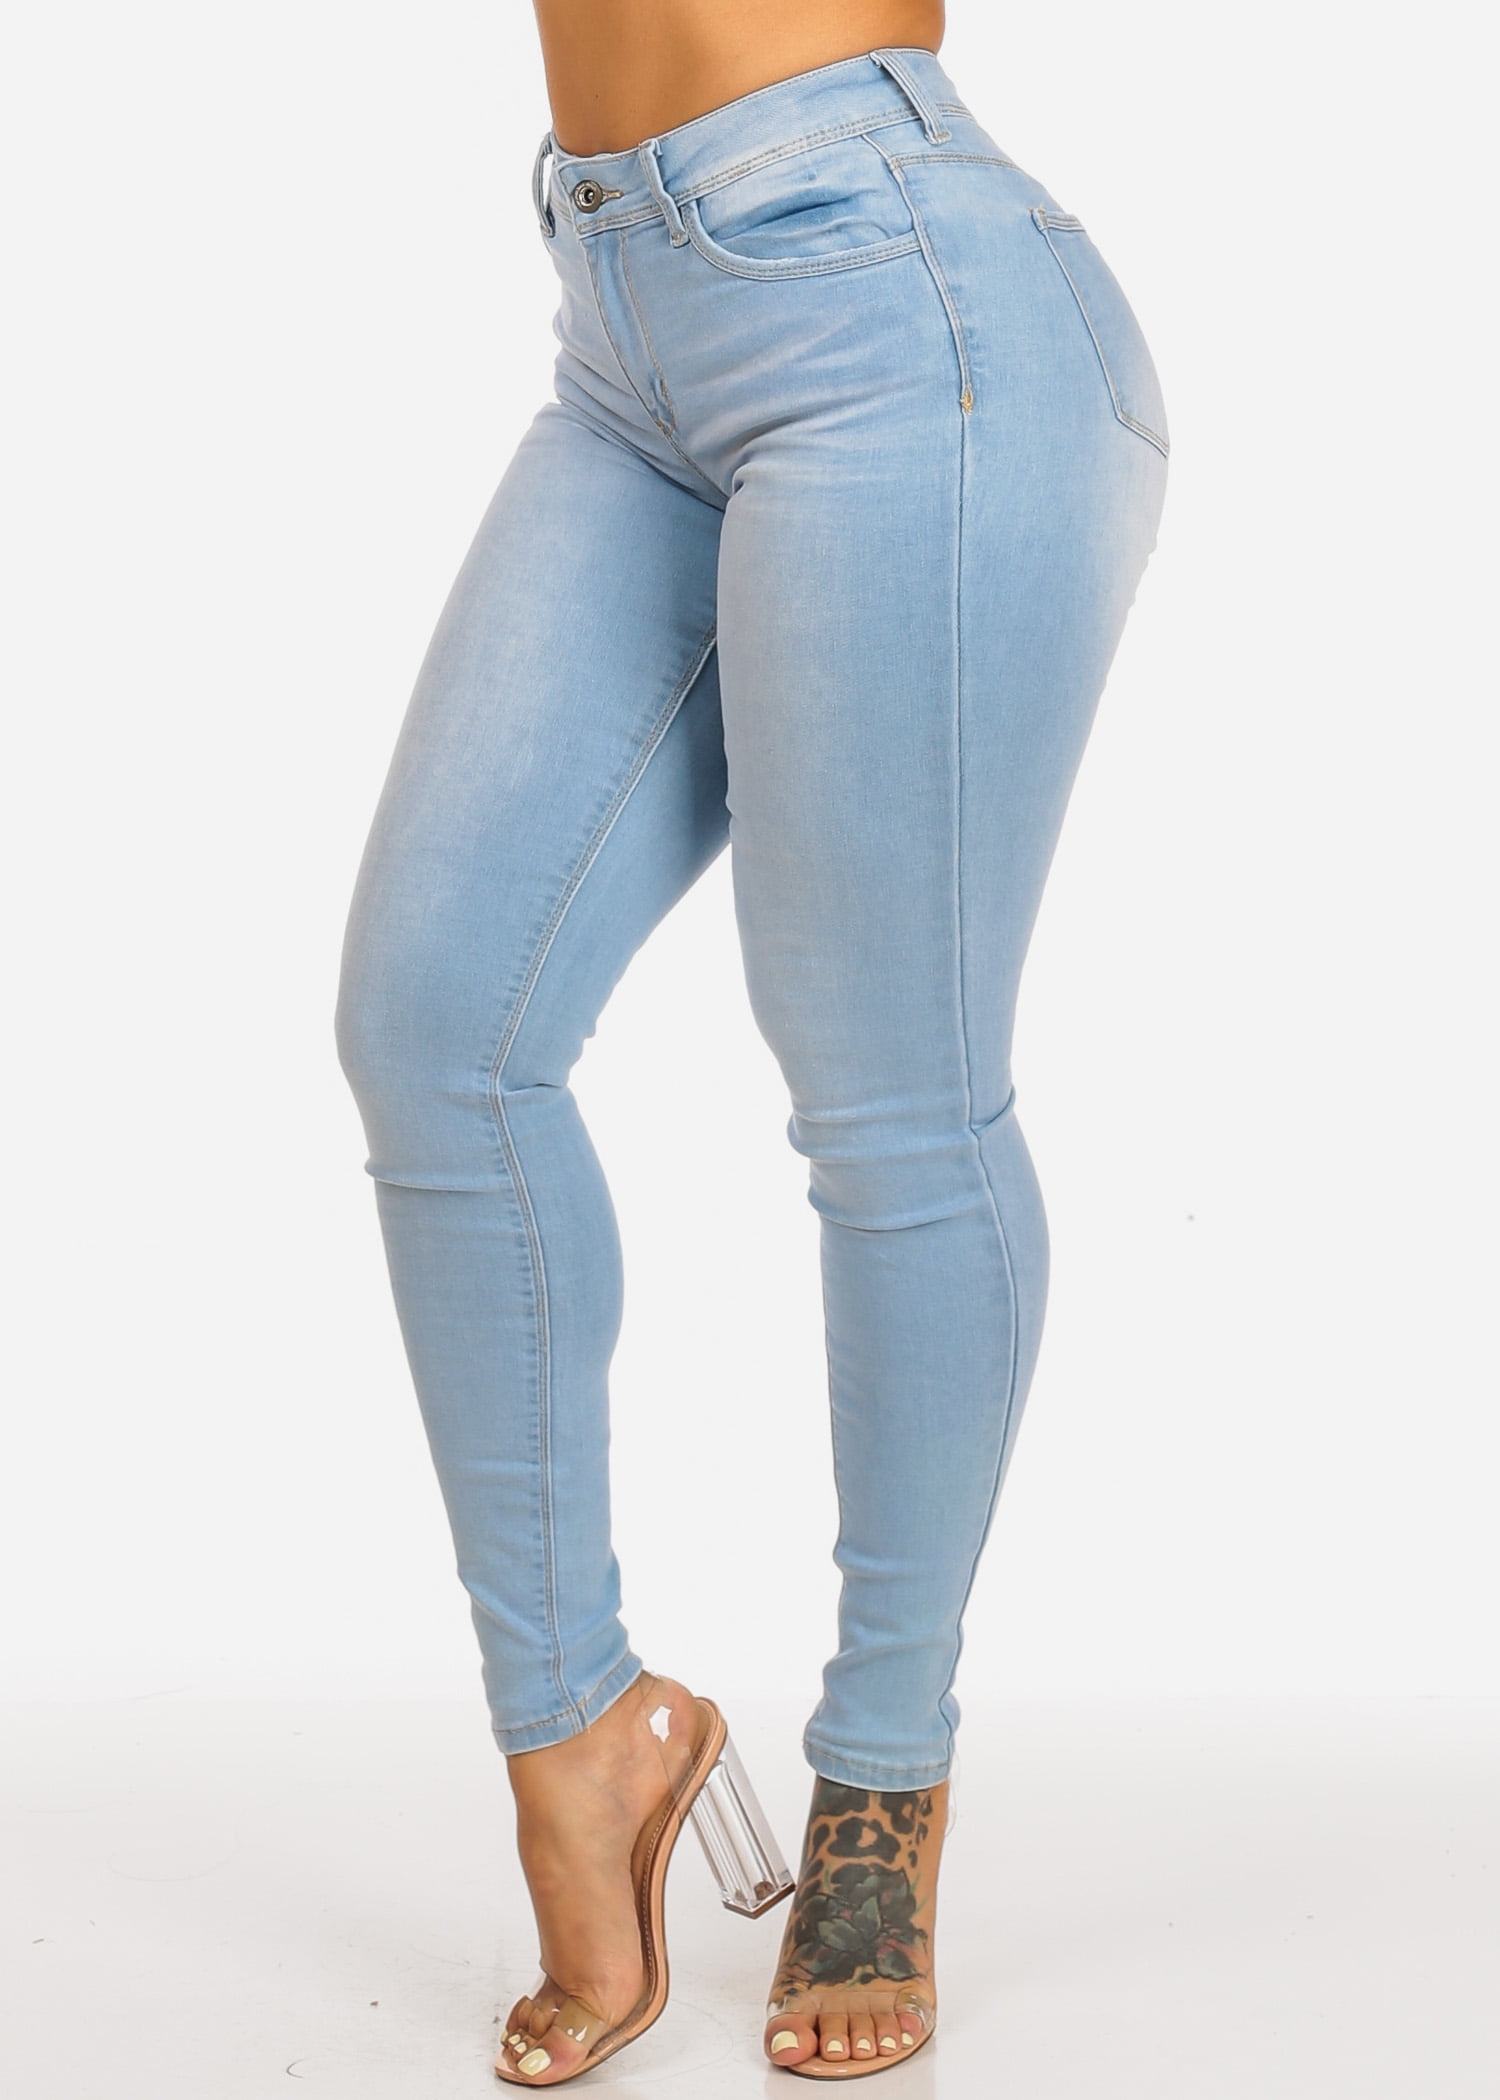 light colored jeggings